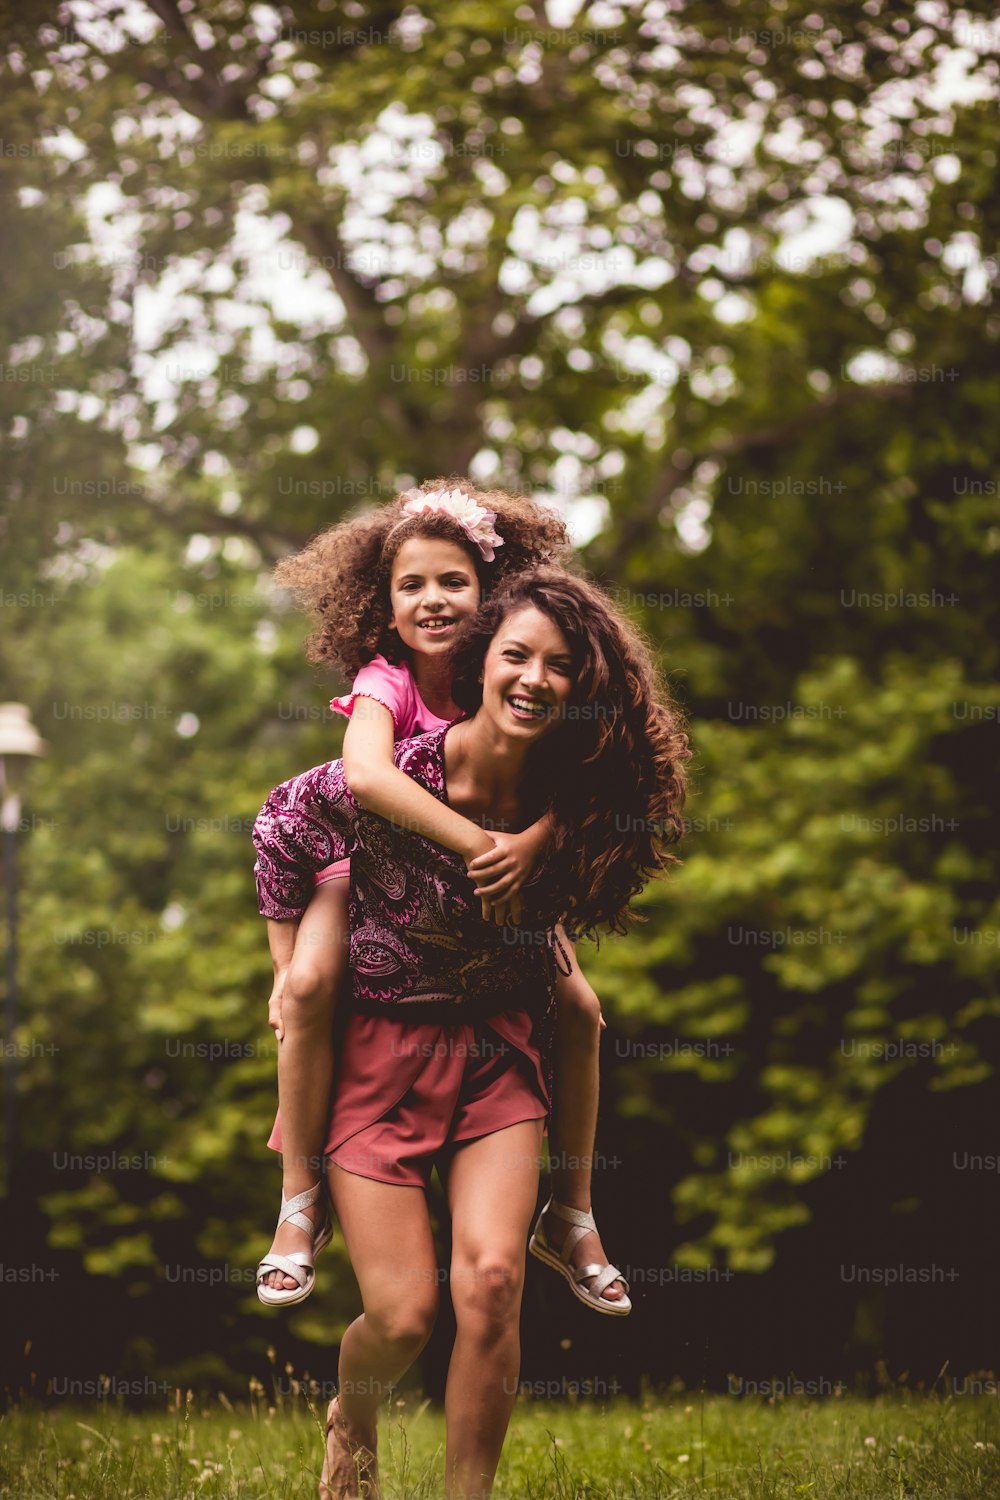 I'm a mommy's little girl. Mother and daughter in nature.